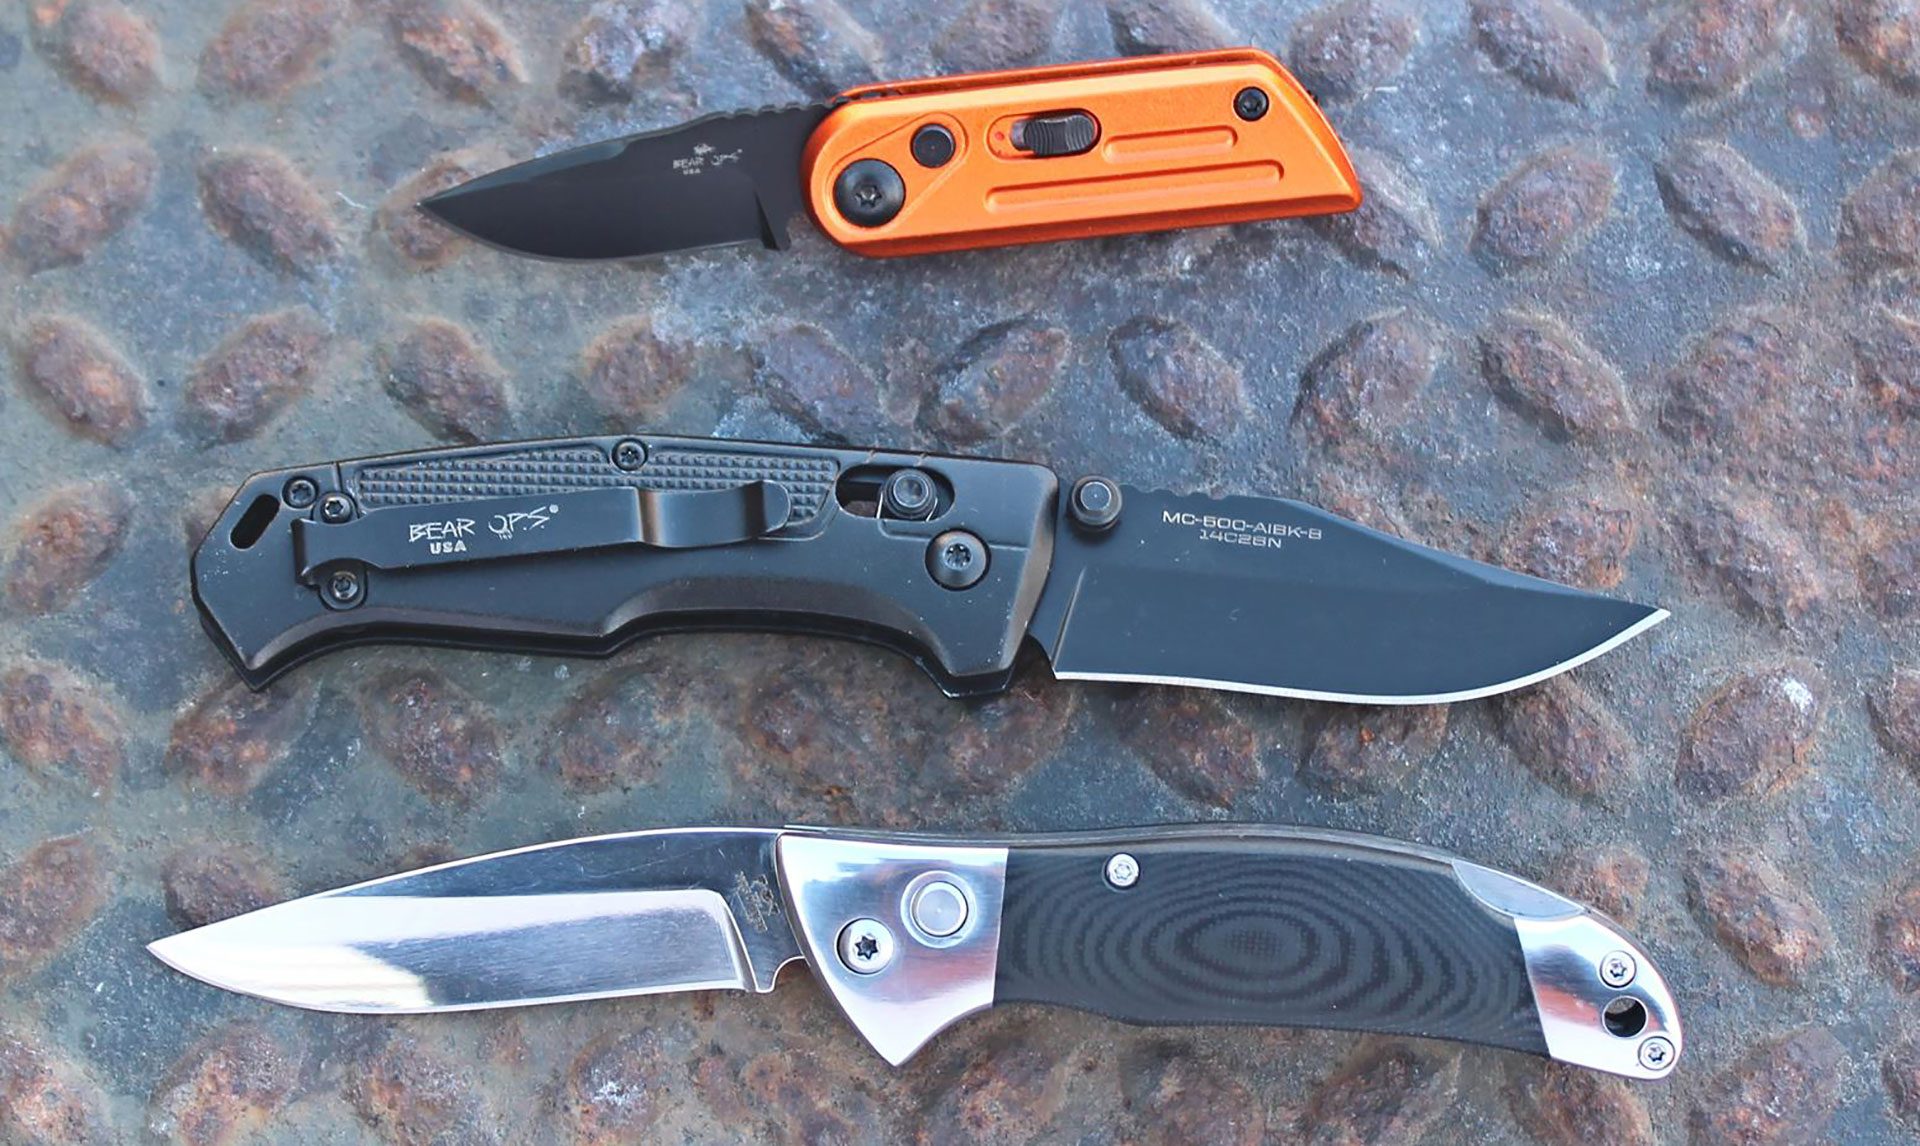 Bear & Sons Cutlery folding knives options for Father's Day.